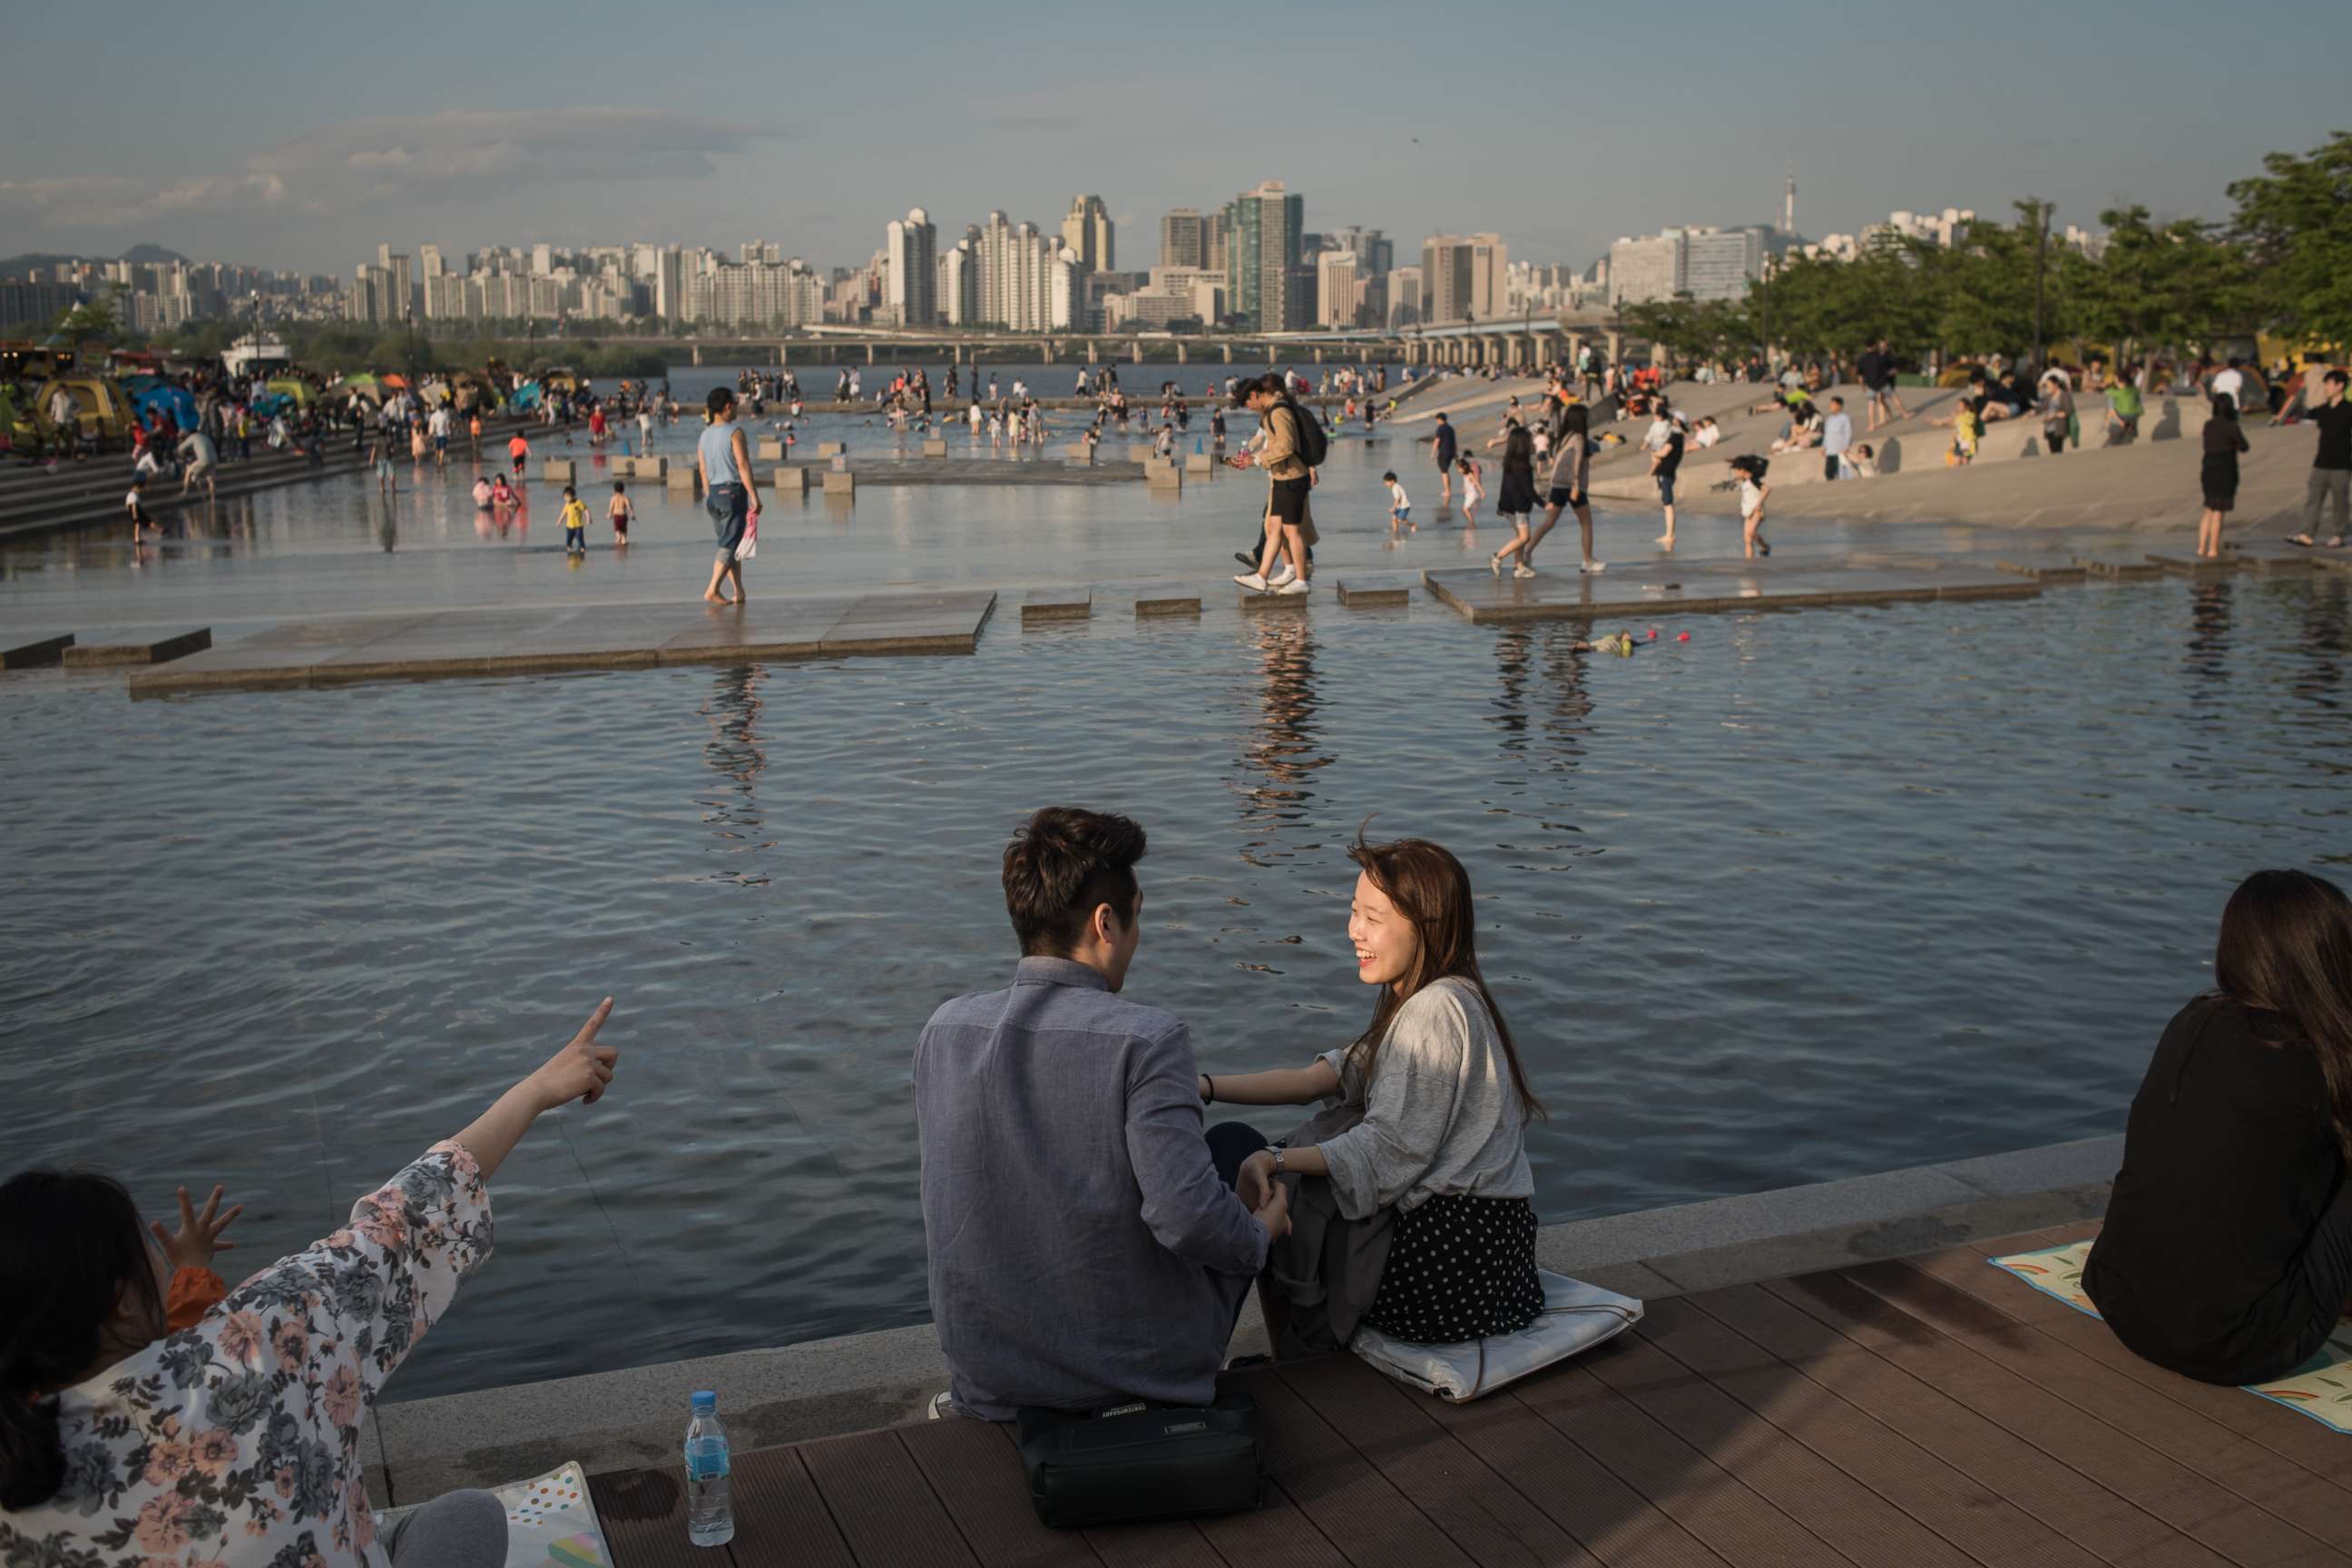 PHOTO: A young couple sits next to a water feature before the Han river and the city skyline, at Yeouido park in Seoul, May 5, 2017.